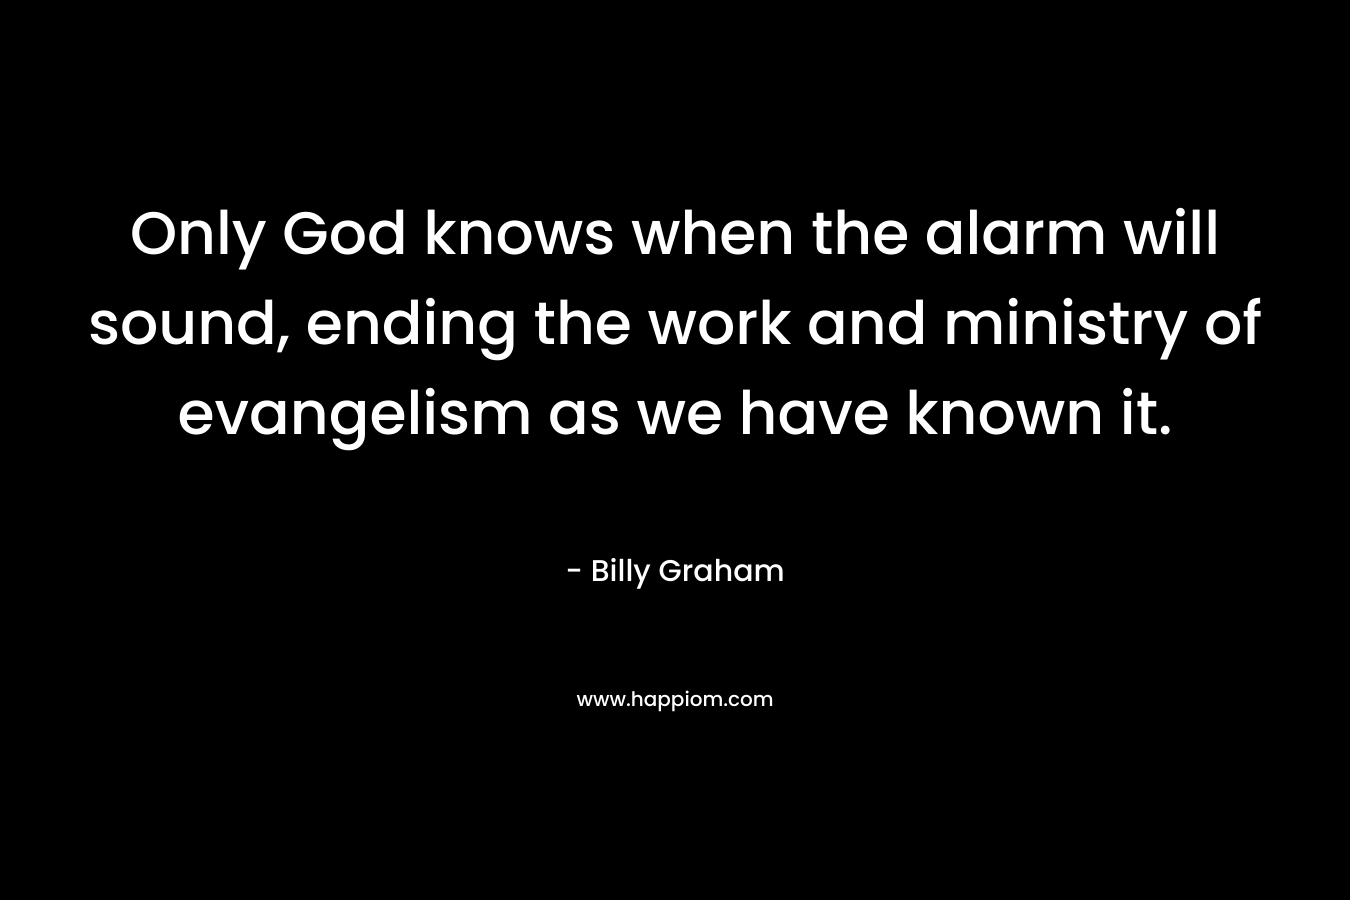 Only God knows when the alarm will sound, ending the work and ministry of evangelism as we have known it.